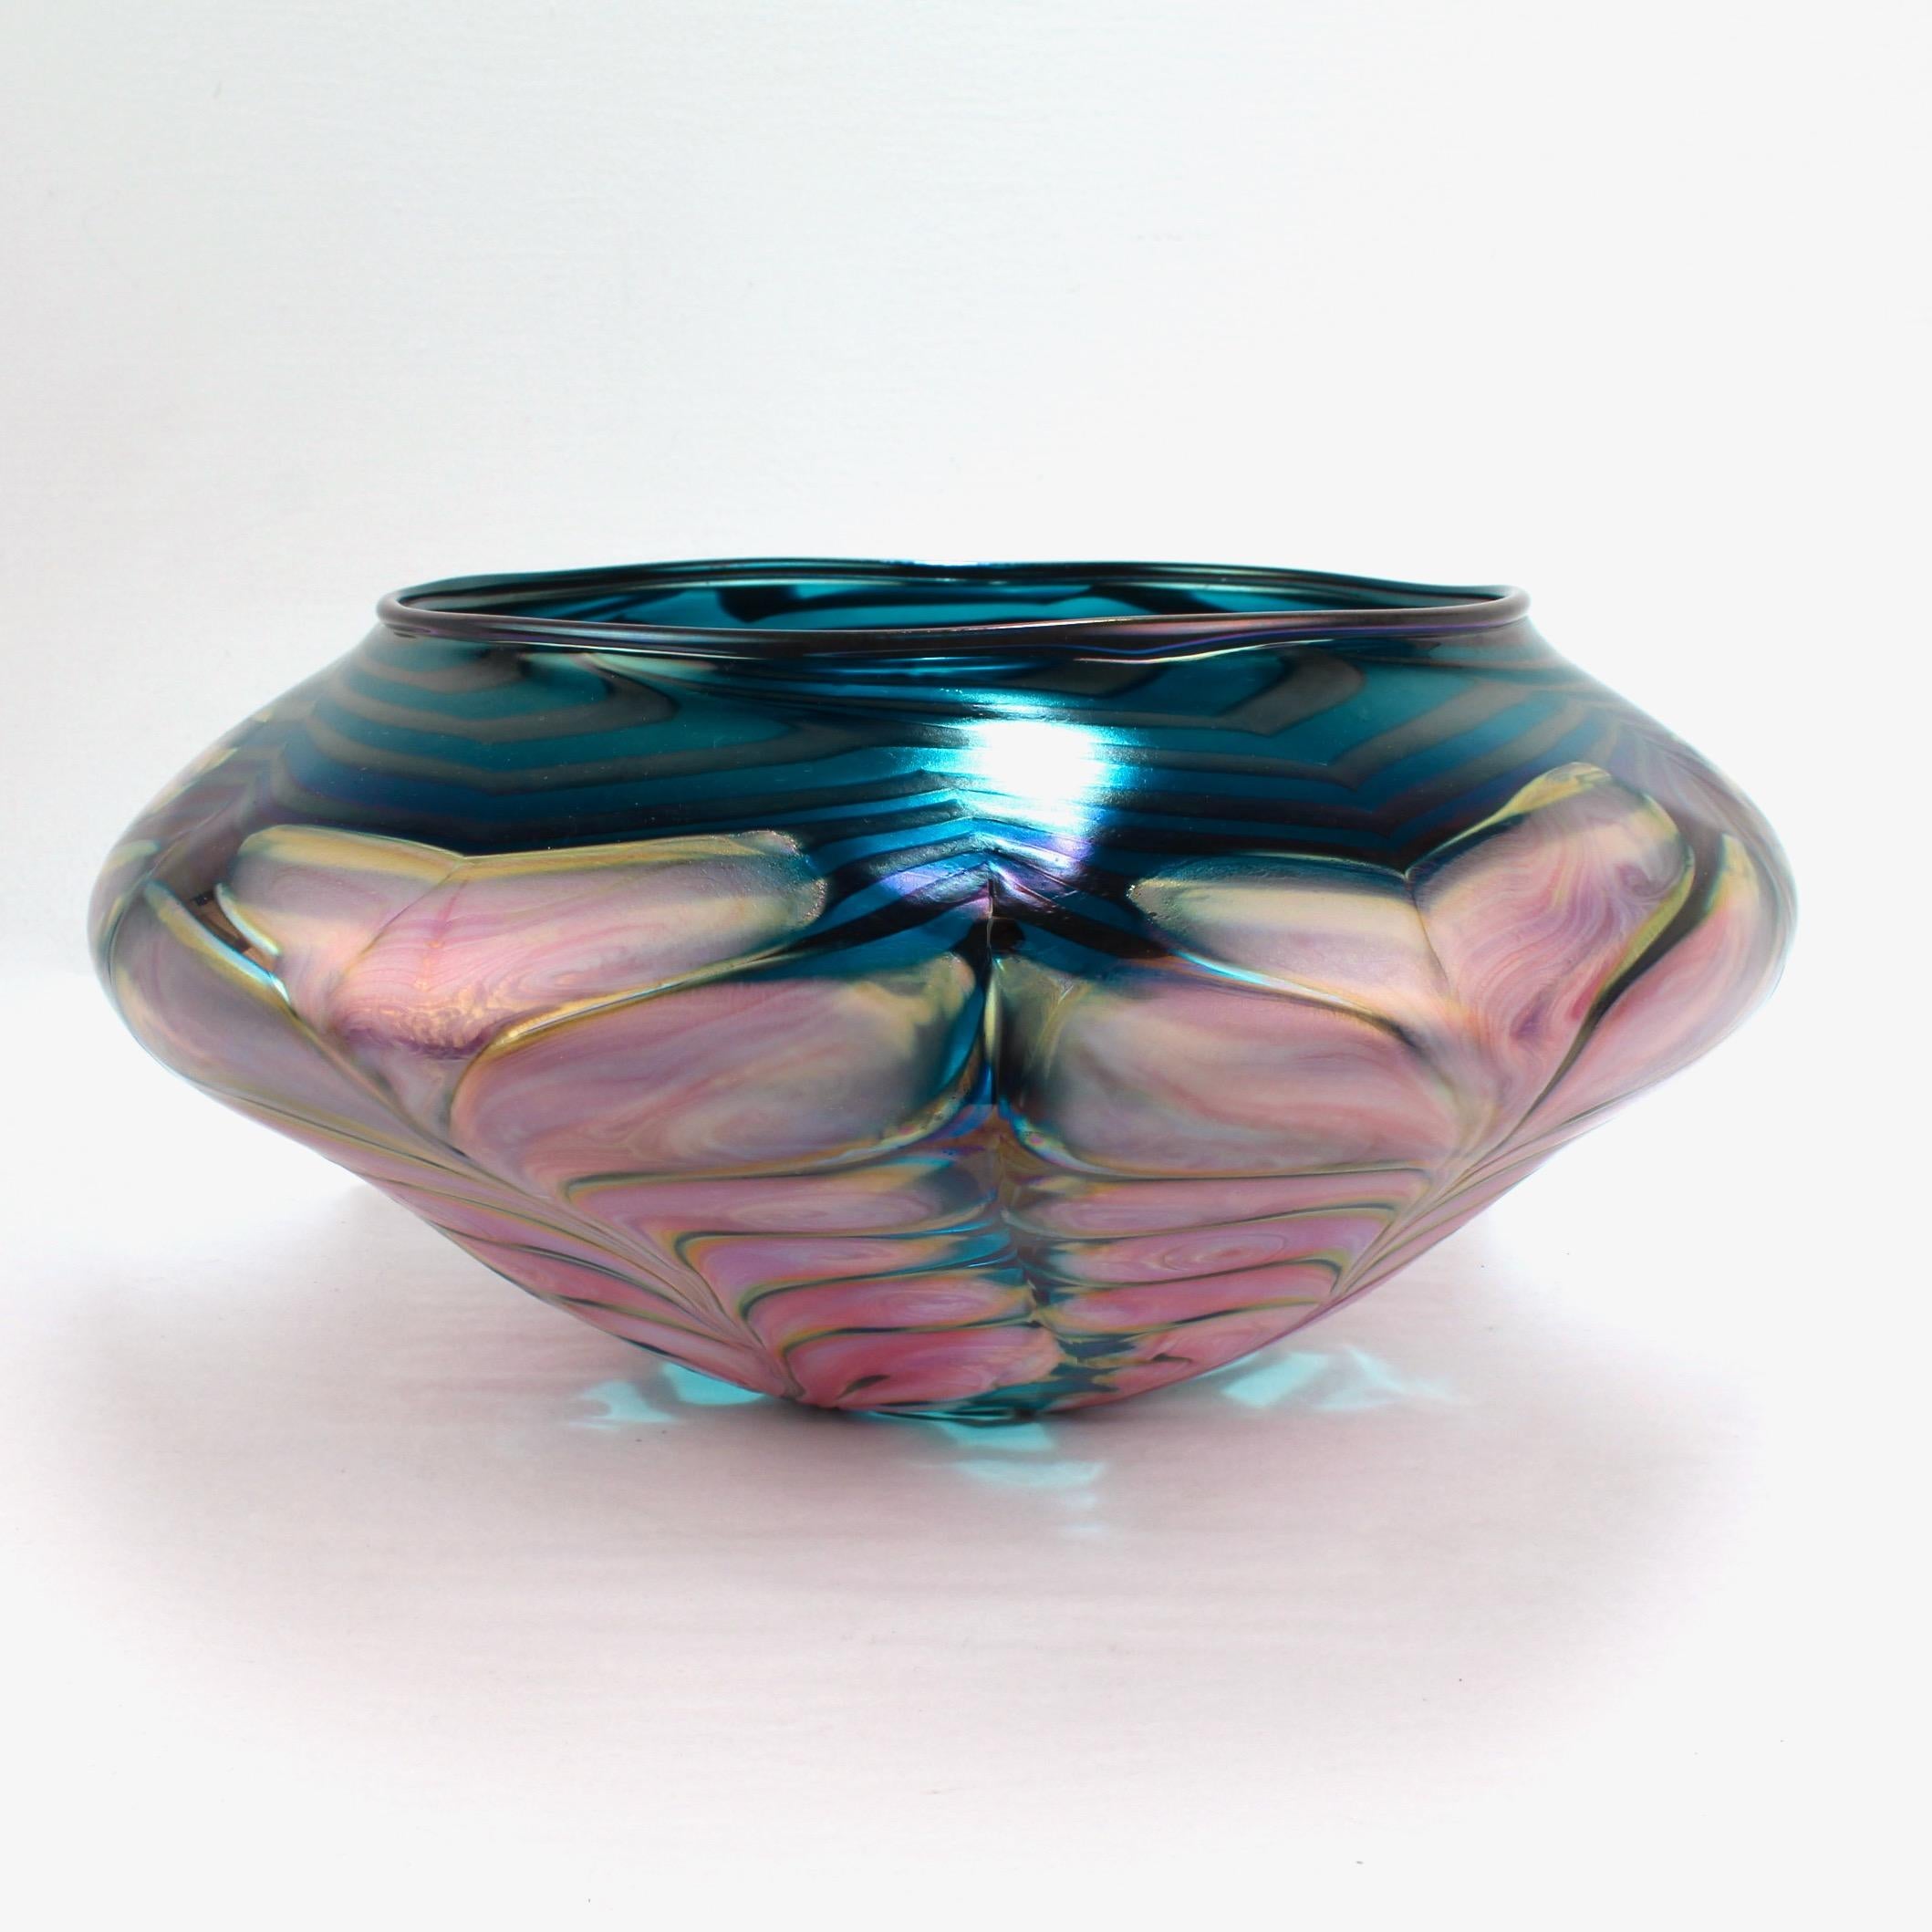 A very large Daniel Lotton art glass bowl or vase.

With pulled feather decoration in pink overlay on a blue ground.

Simply great craft!

Date:
1991

Overall condition:
It is in overall good, as-pictured, used estate condition with some